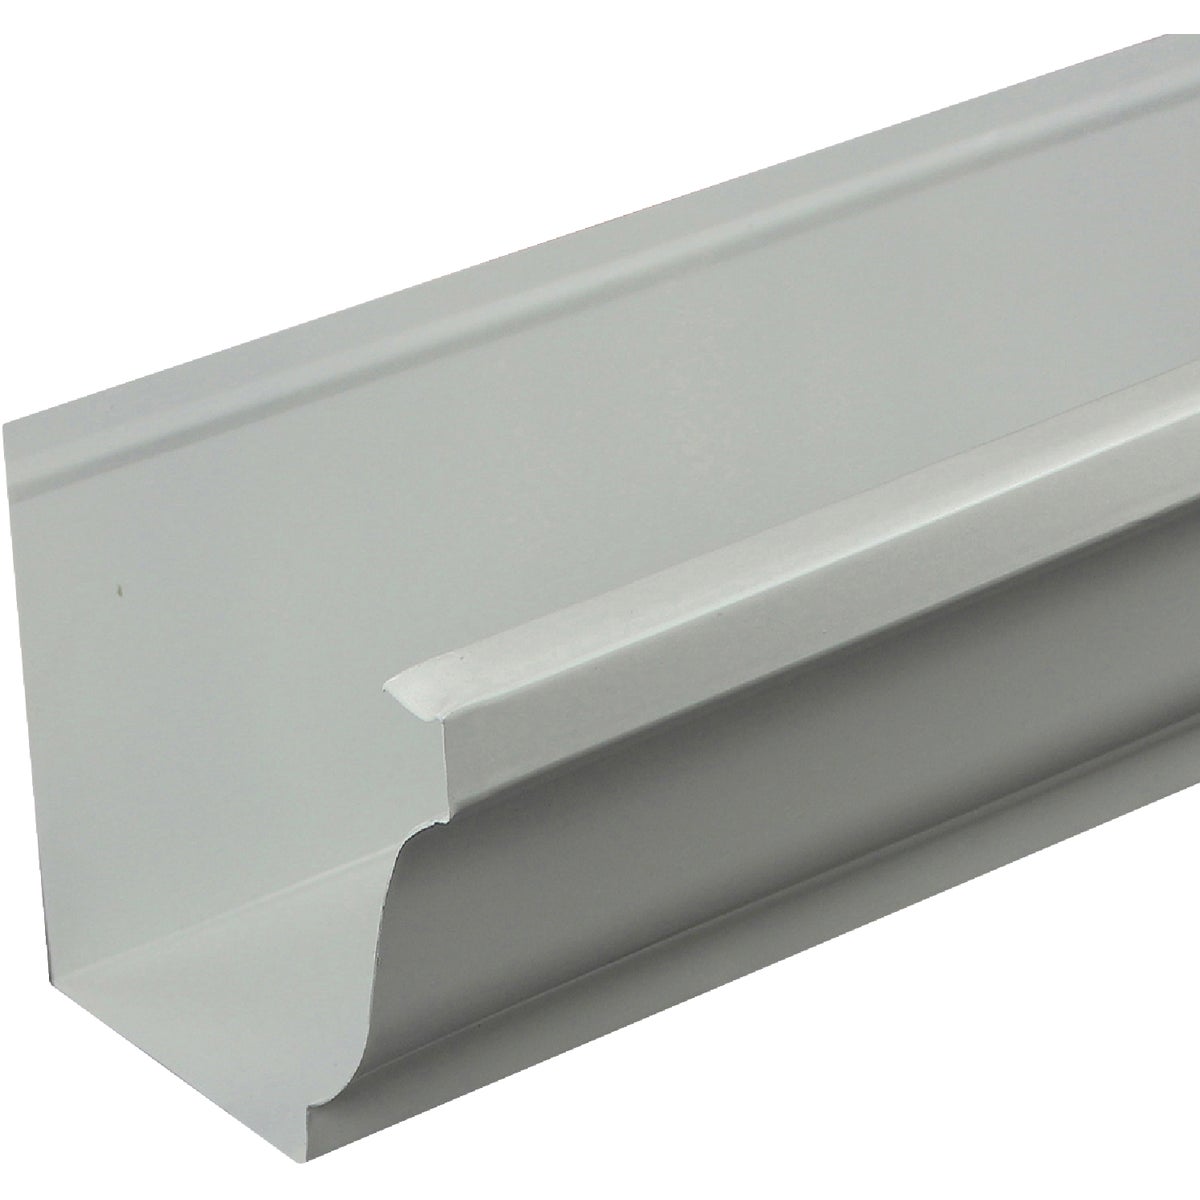 Spectra Metals 5 In. x 10 Ft. K-Style White 0.019 Aluminum Gutter